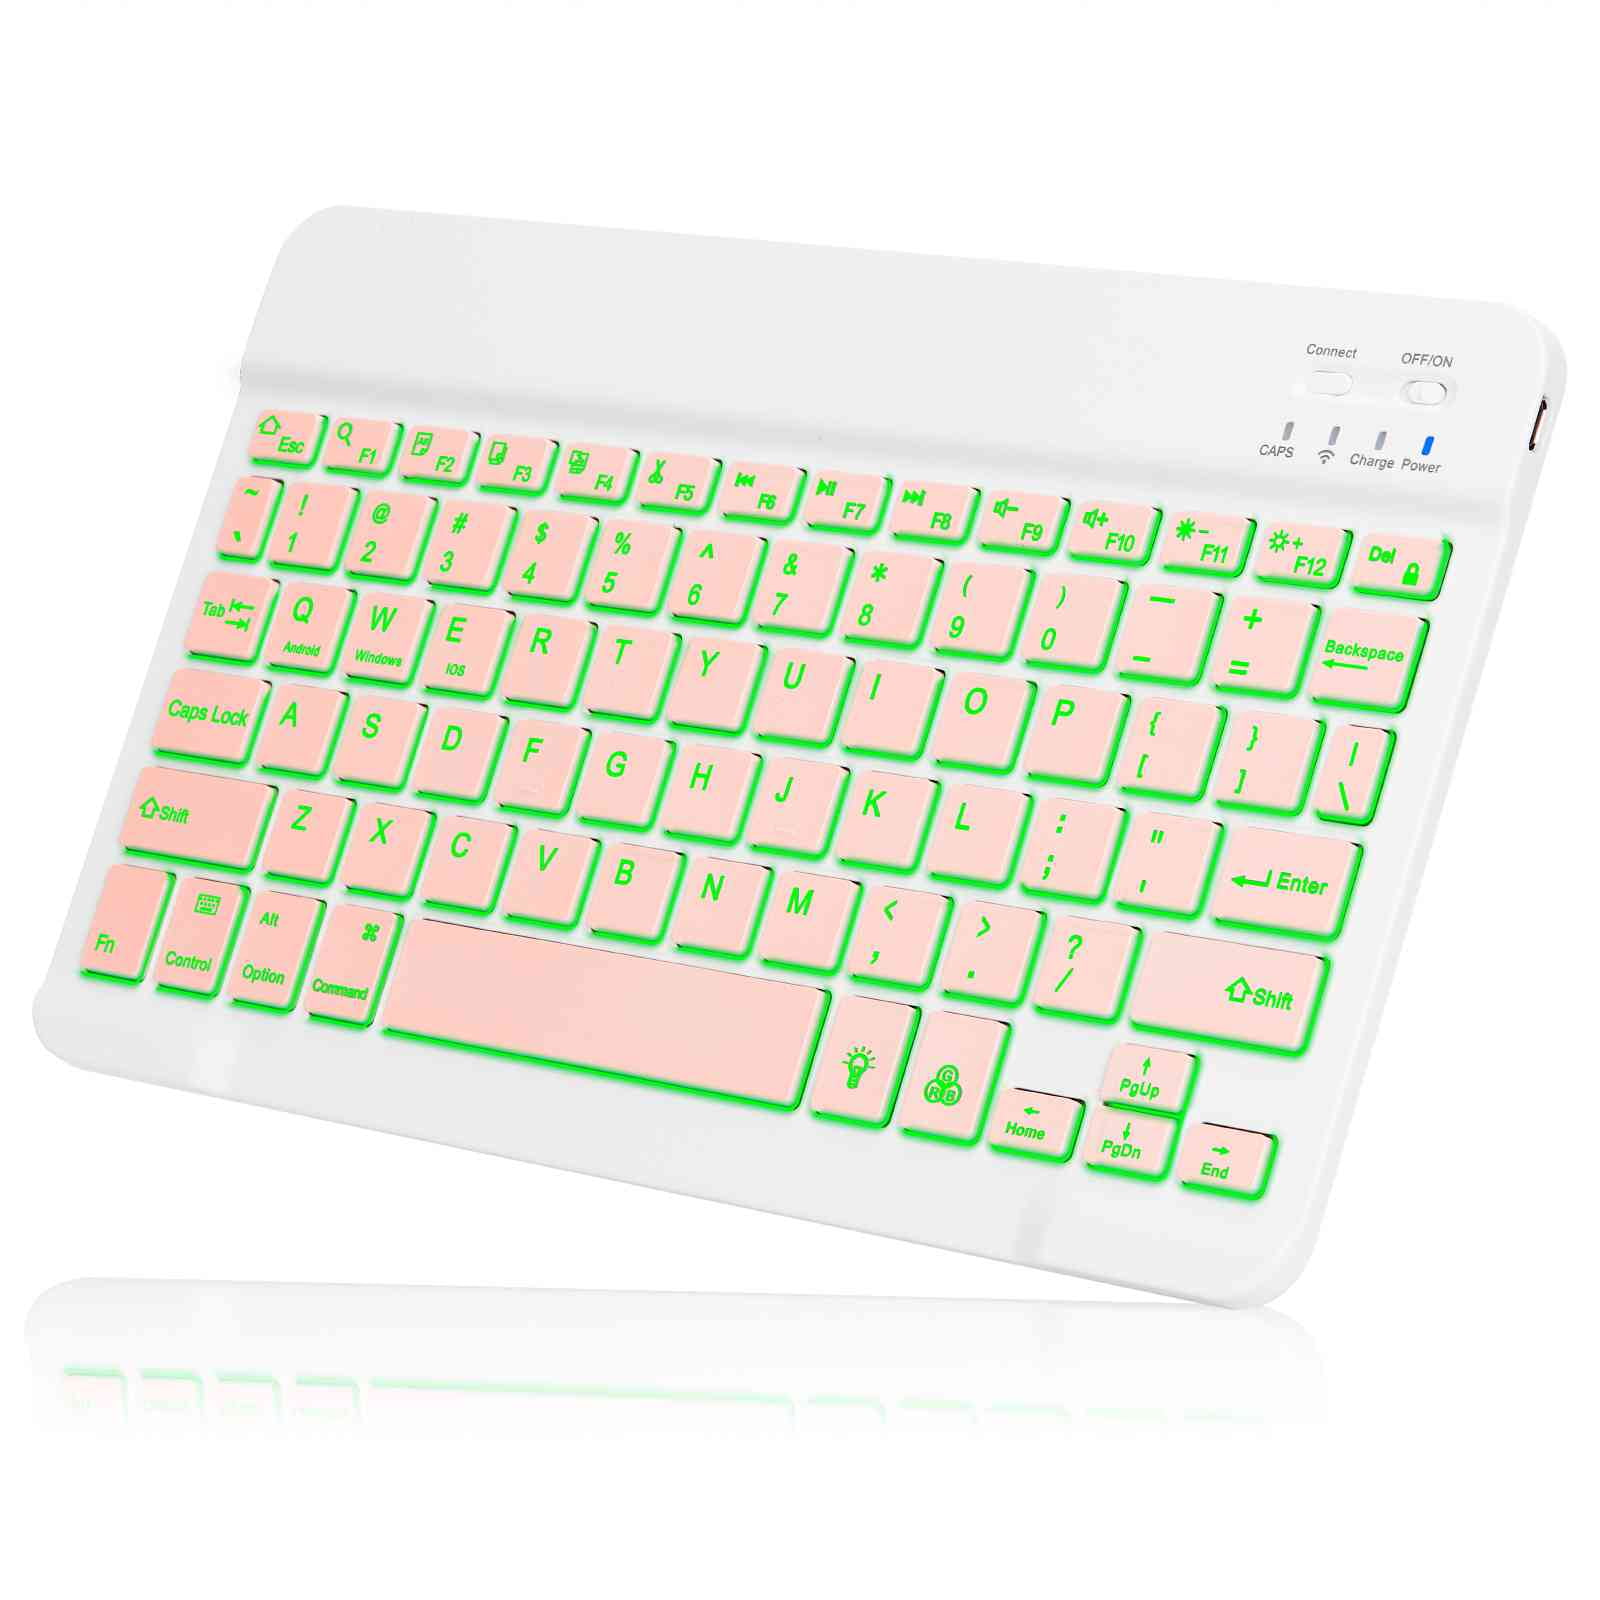 UX030 Lightweight Keyboard and Mouse with Background RGB Light, Multi Device slim Rechargeable Keyboard Bluetooth 5.1 and 2.4GHz Stable Connection Keyboard for HUAWEI Walmart.com